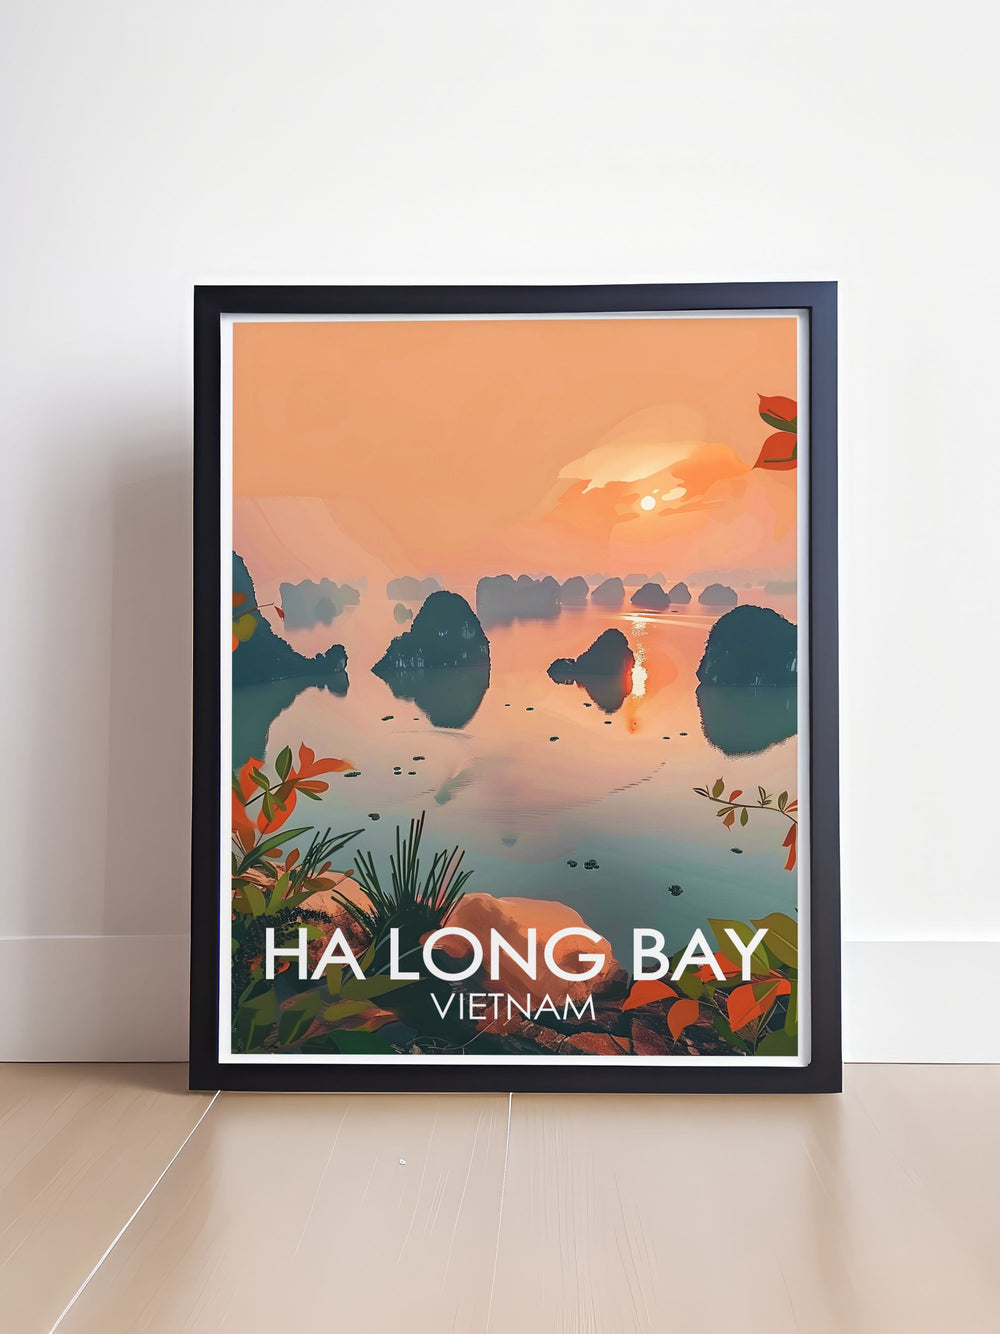 This travel poster of Ha Long Bay captures the stunning limestone pillars and emerald waters of the UNESCO World Heritage site, perfect for adding a touch of Vietnams natural beauty to your home decor.